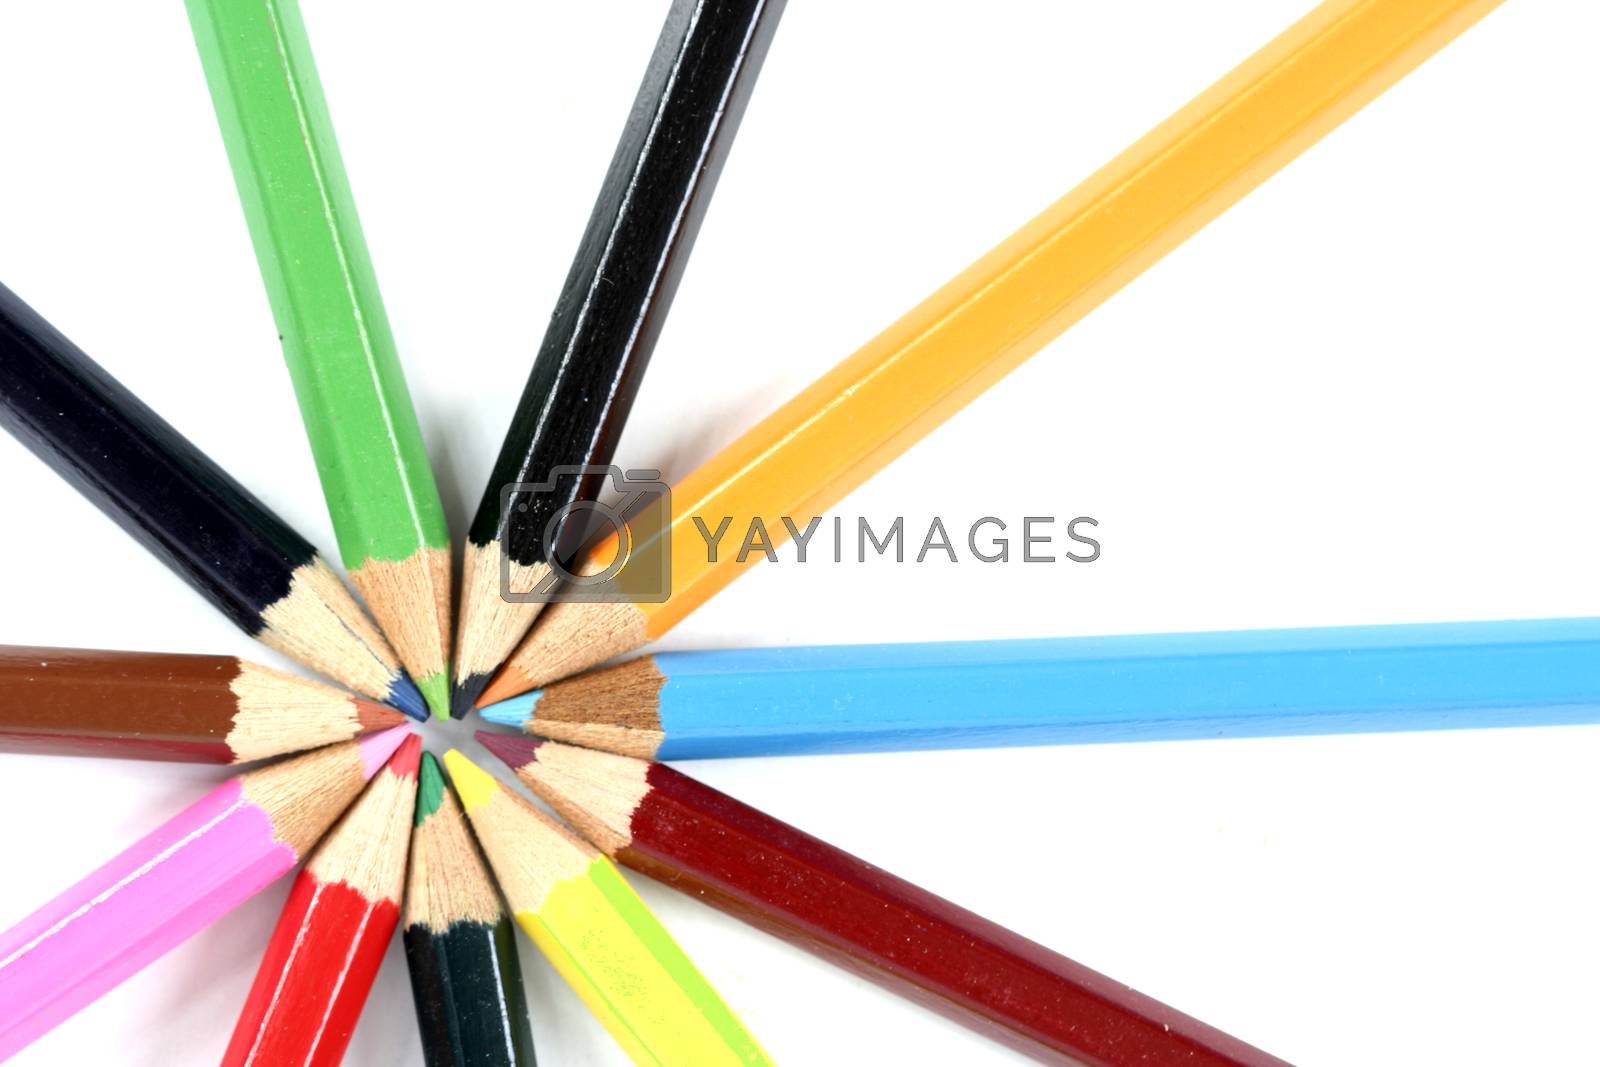 Royalty free image of Close-up pencil. by arosoft